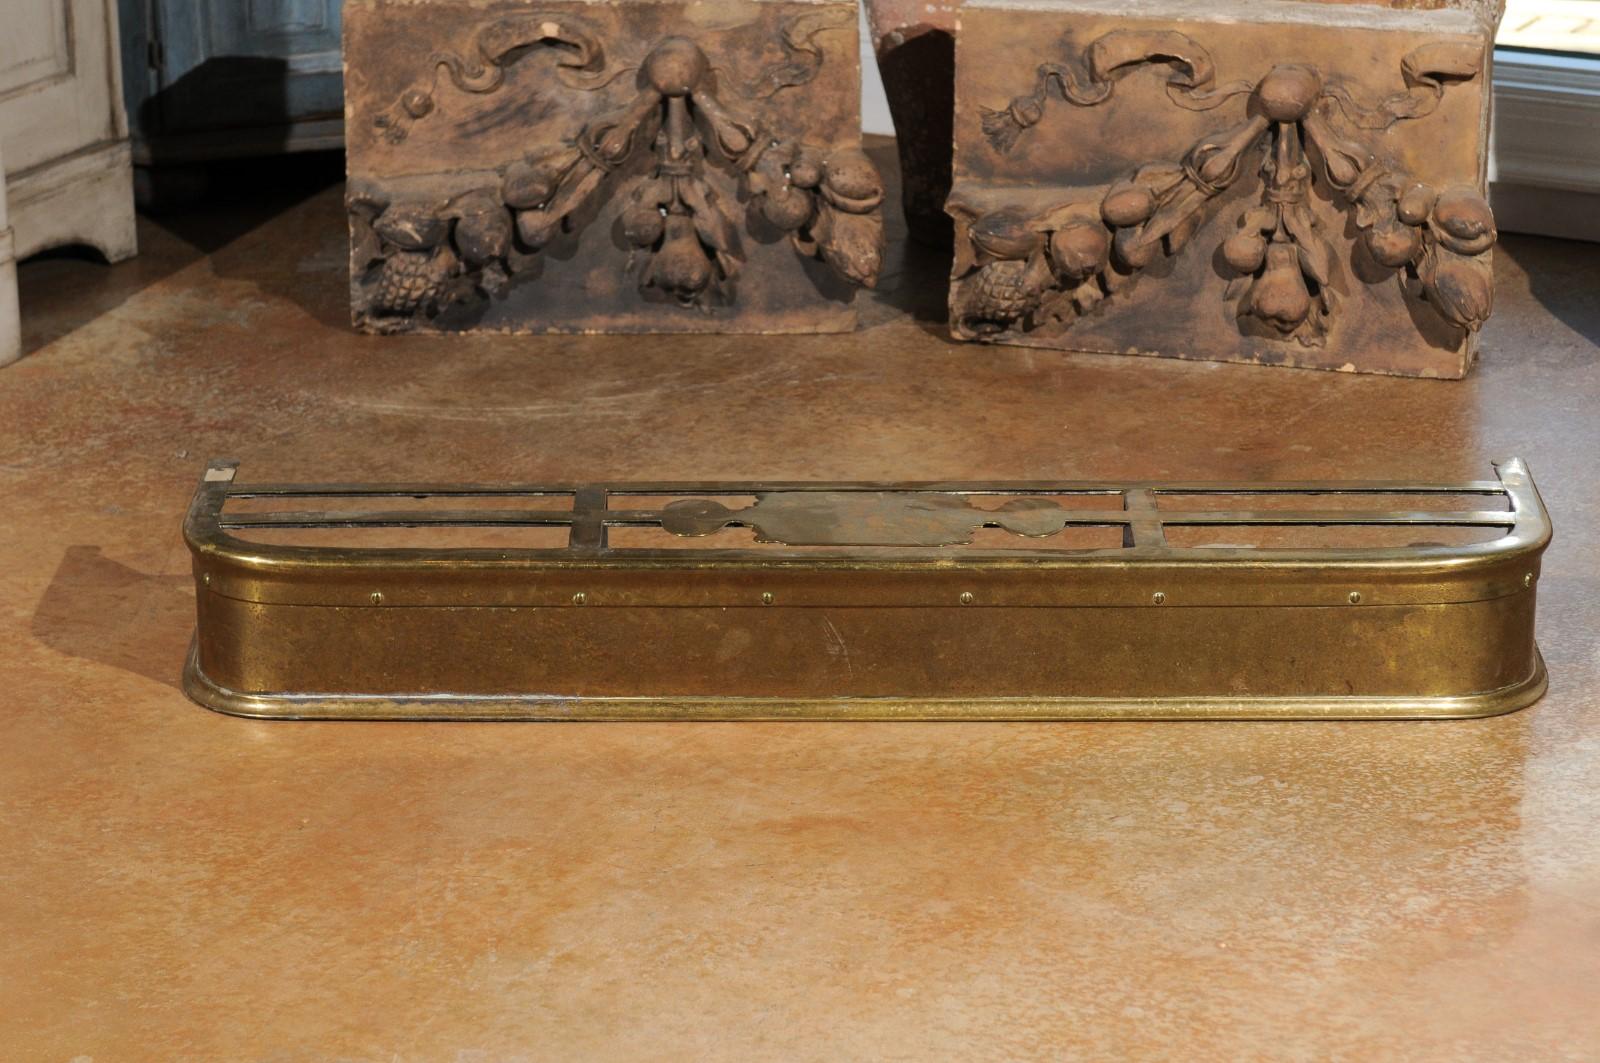 An English Victorian period brass fireplace fender from the late 19th century. Born under the reign of Queen Victoria in the later decades of the 19th century, this brass hearth fender was created to prevent logs from rolling out on the floor.